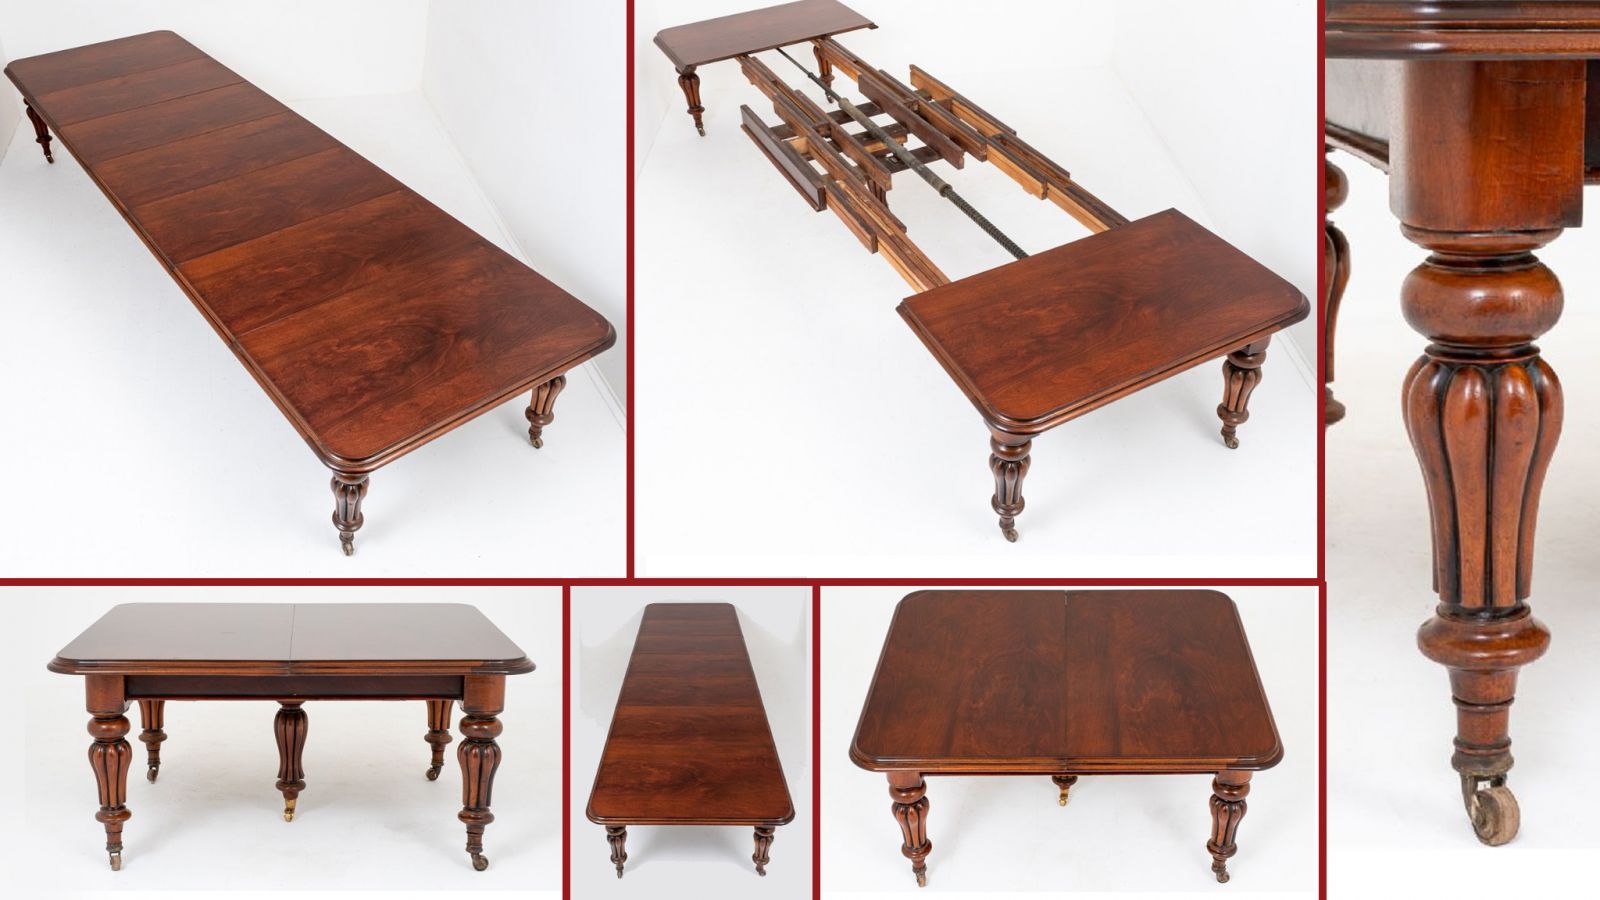 Extending mahogany table for the Victorian Dining Room